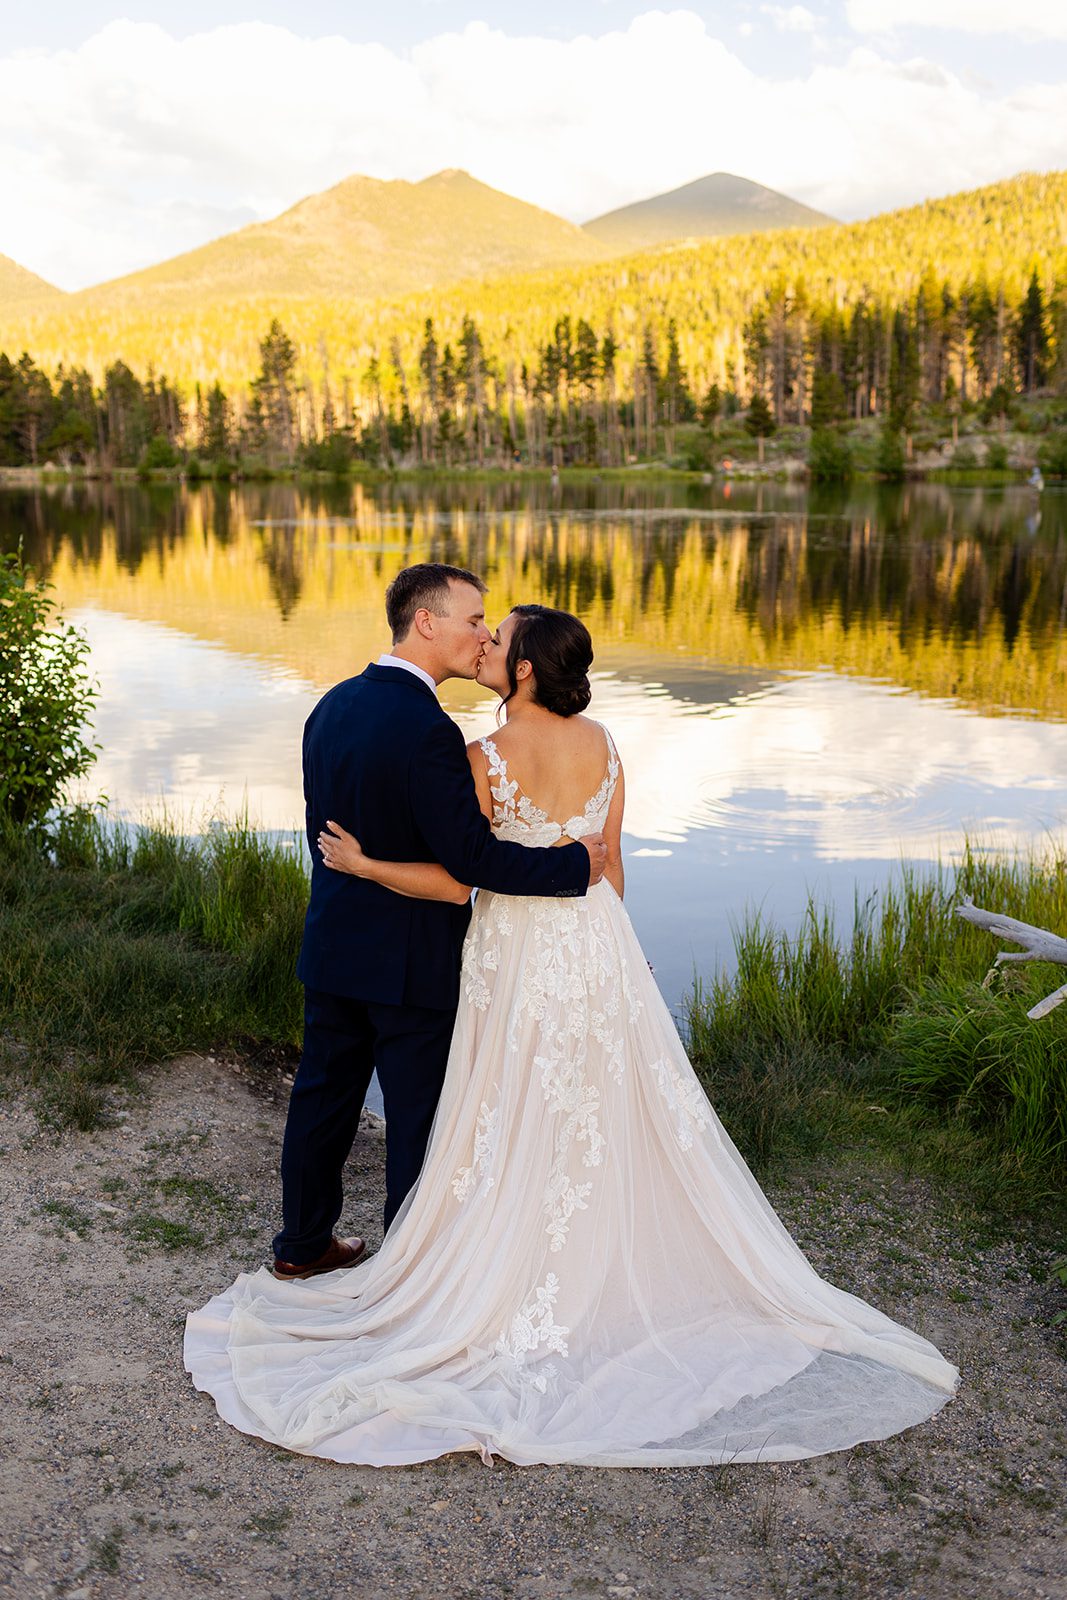 Bride and groom kiss in front of Sprague Lake at sunset for their elopement